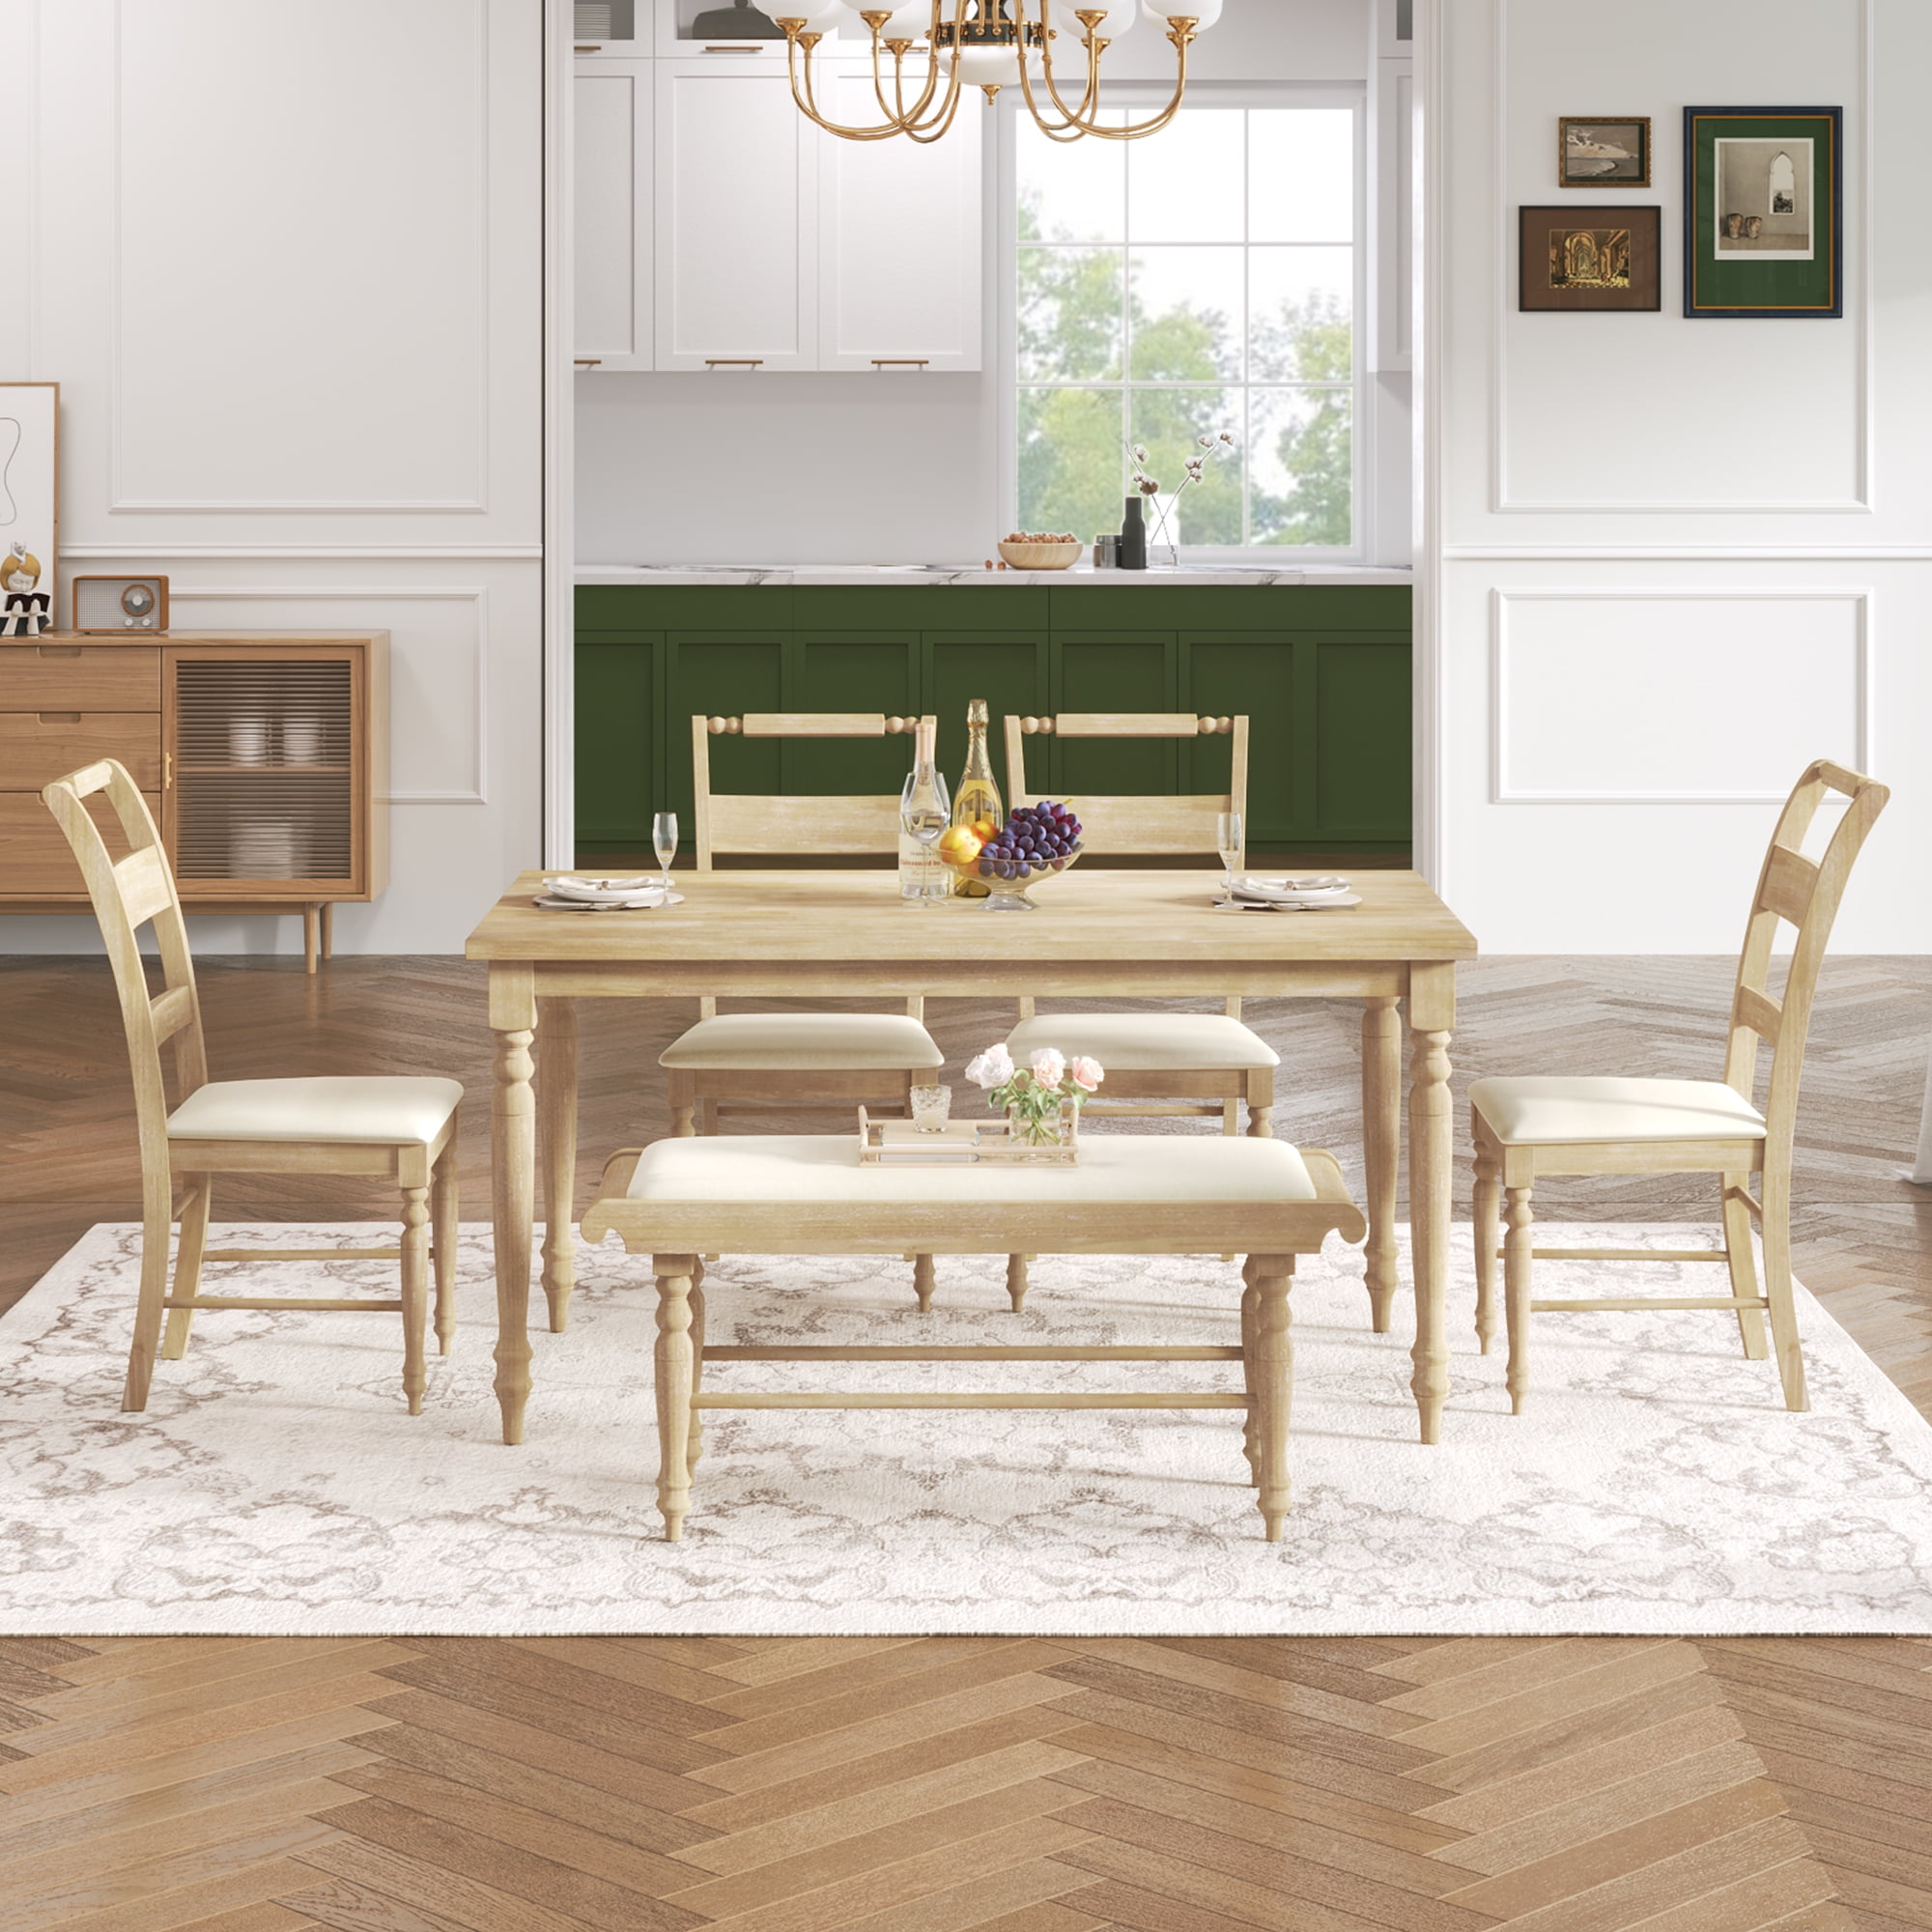 Dining Room Set for 6, Atumon Dining Table Set with Cushioned Bench and ...